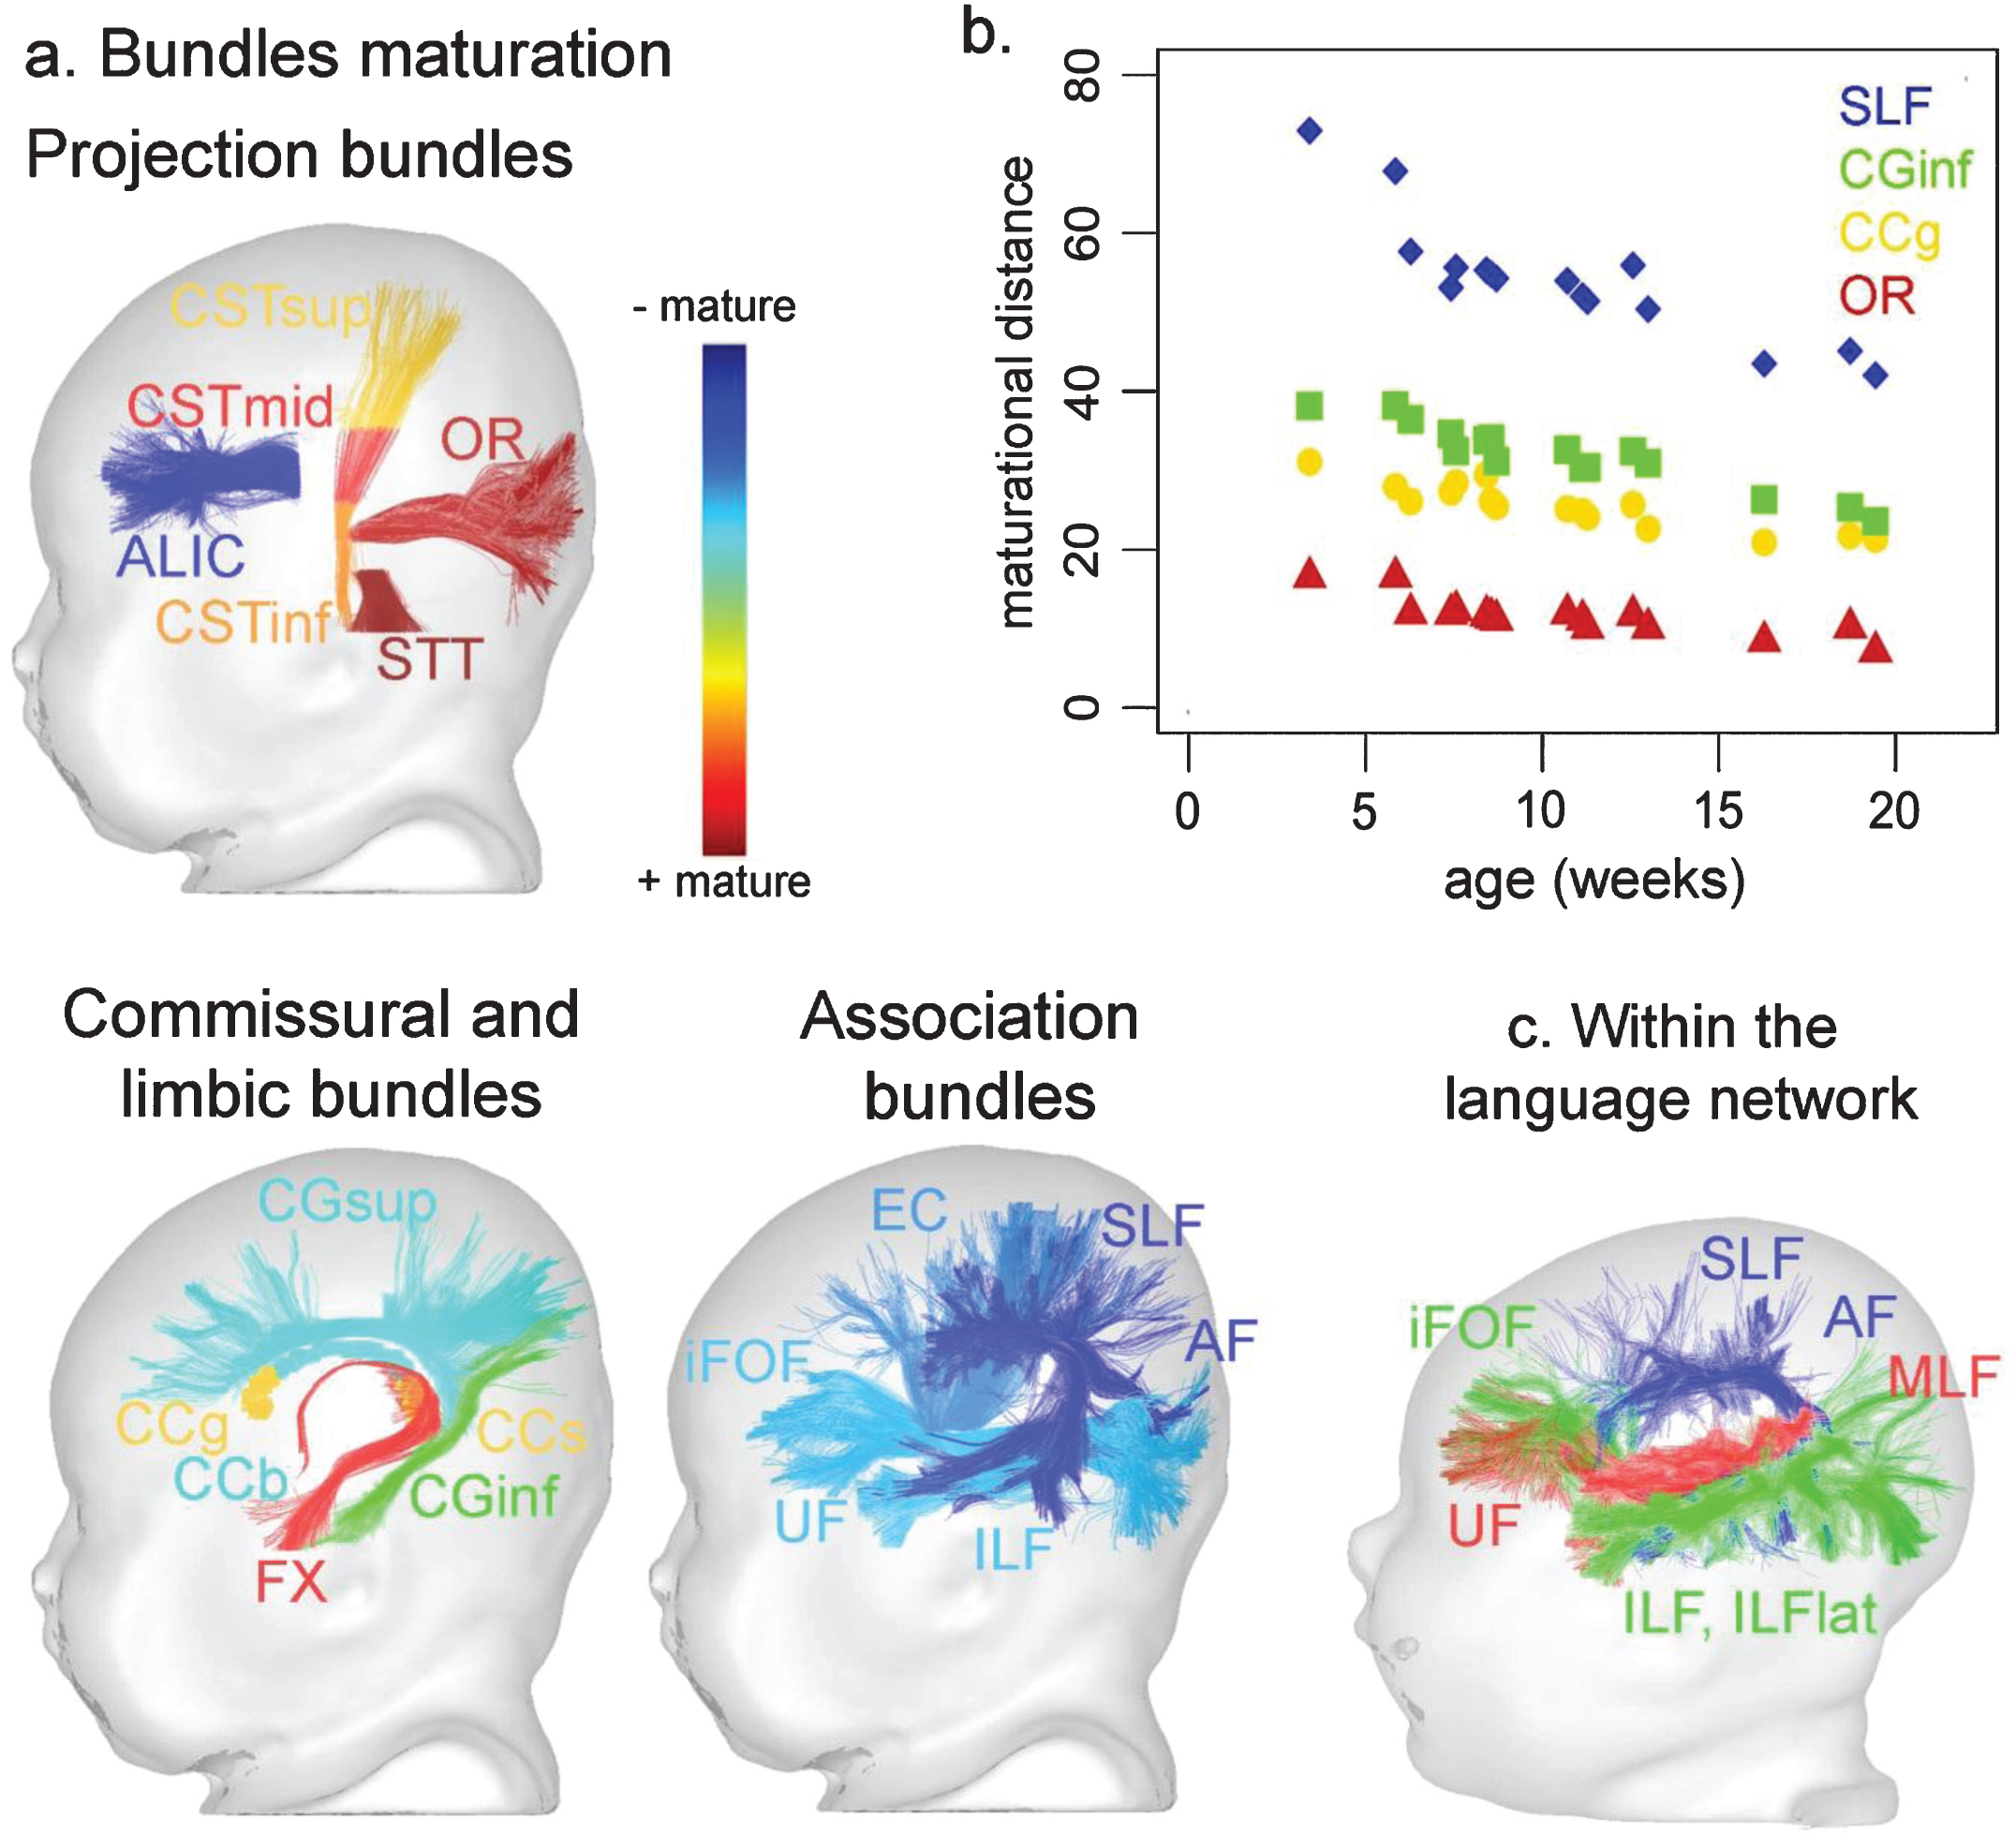 Asynchronous maturation of white matter bundles based on multi-parametric assessment of MRI parameters. a: Relative maturation of projection, commissural, limbic and association bundles during infancy (from the most mature in red to the least mature in blue), evaluated from 3 to 21 weeks of age by a multi-parametric approach that computes the maturational distance relative to the adult stage (adapted from [8, 40]). b. Age-related changes of this maturational distance for the four bundles presented in Figs. 1 and 3 (adapted from [40]). c. Relative maturation within the language network, showing advanced maturation of the ventral pathway (uncinate, middle and inferior longitudinal, inferior fronto-occipital fascicles) compared to the dorsal pathway (arcuate and superior longitudinal fascicles) during infancy (adapted from [43]). The color scales of maturation are not comparable in a. and c. Abbreviations: Projection bundles: ALIC anterior limb of the internal capsule; CST cortico-spinal tract (inf/mid/sup inferior/middle/superior portions); OR optic radiations; STT spino-thalamic tract; Callosal bundles: CC corpus callosum (g/b/s genu/body/splenium); Limbic bundles: CG cingulum (inf/sup inferior/superior parts); FX fornix; Association bundles: AF arcuate fasciculus; EC external capsule; iFOF inferior fronto-occipital fasciculus; ILF inferior longitudinal fasciculus; SLF superior longitudinal fasciculus; UF uncinate fasciculus.